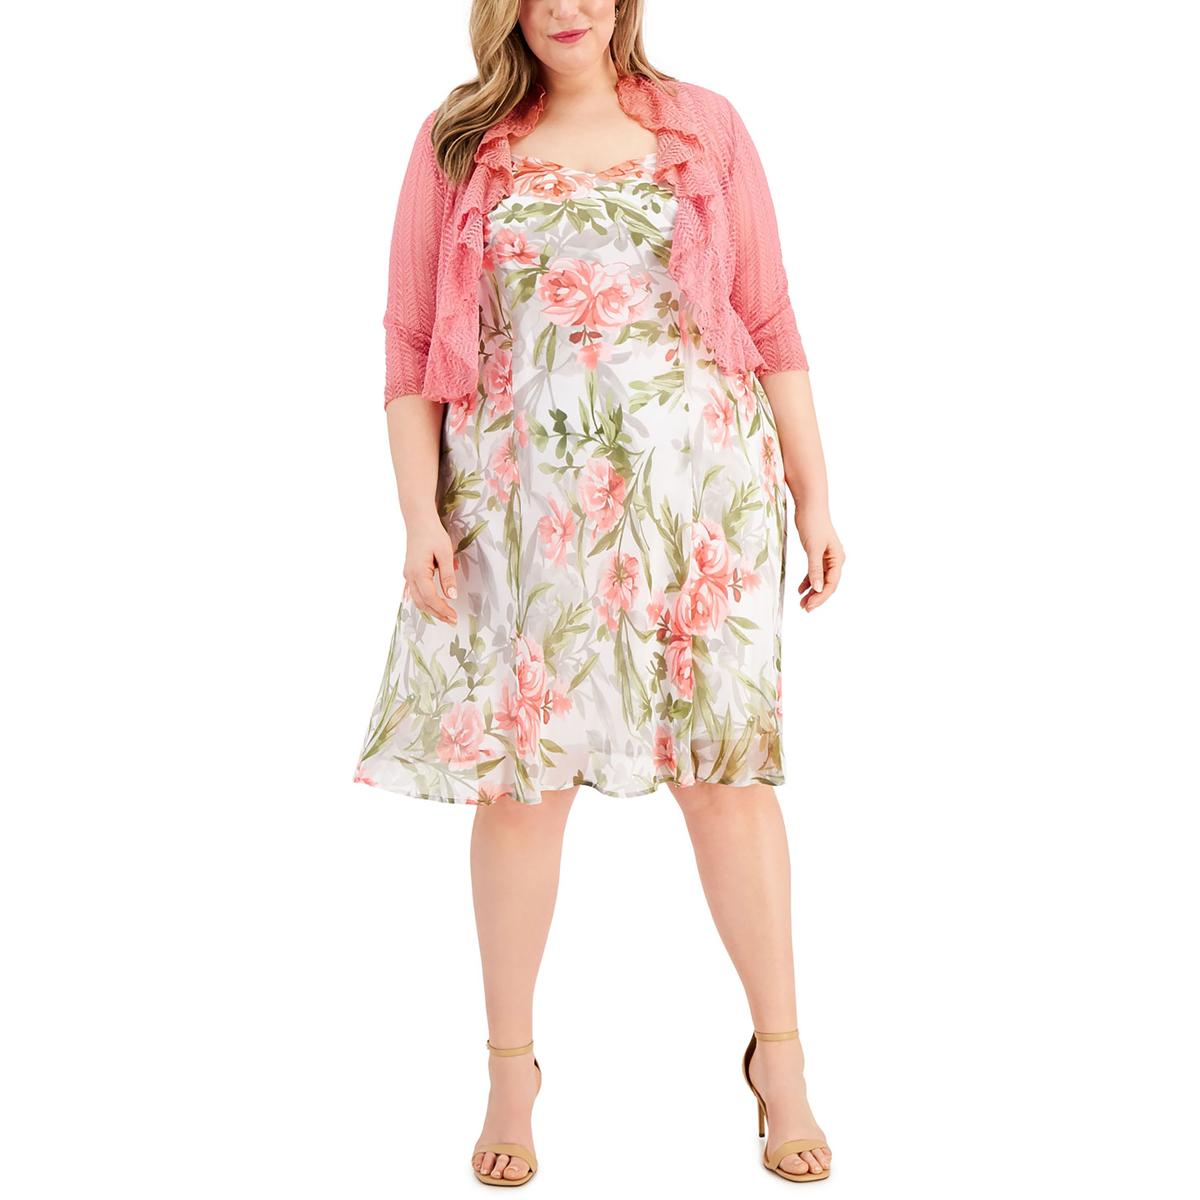 Shop Women's Plus Size Dresses from Alfani up to 85% Off